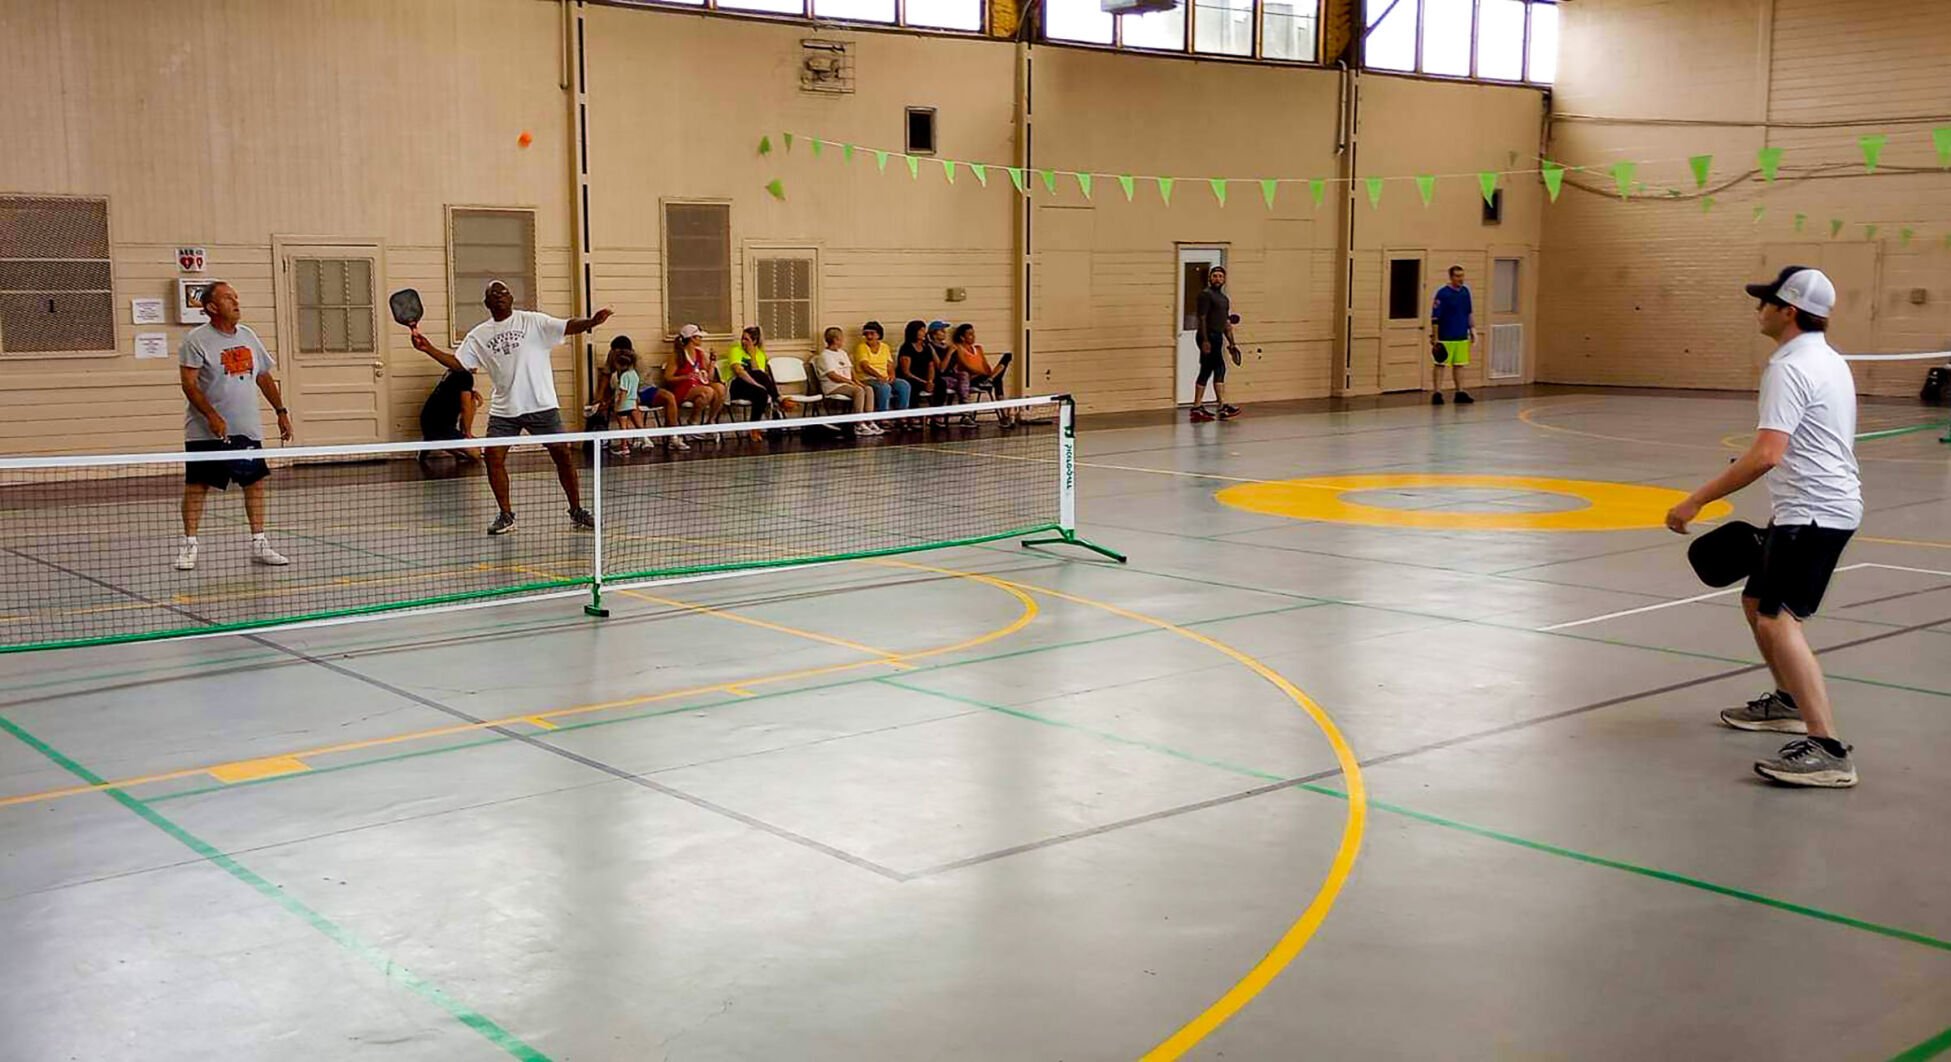 Pickleball Craze Continues: Fastest Growing Sport in the Country with 85.7% Growth